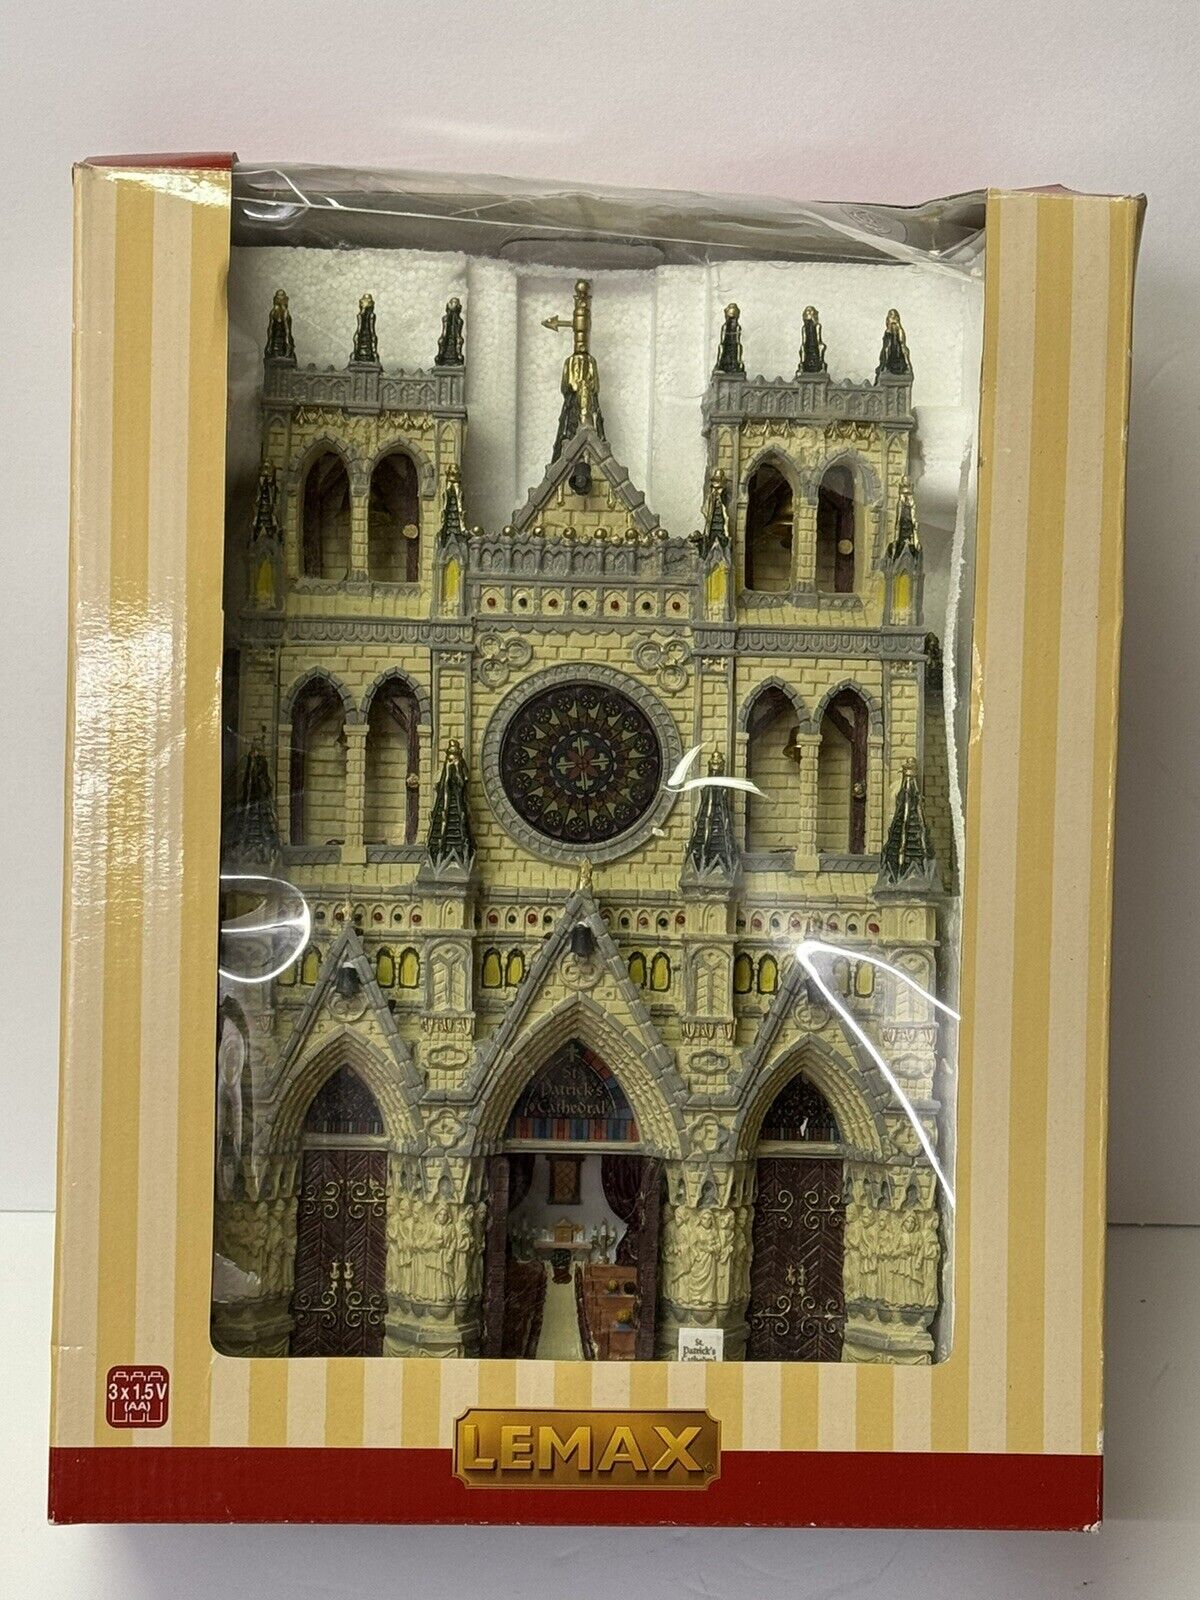 Lemax St. Patrick's Cathedral Facade Famous Church Essex Street Tabletop Hanging